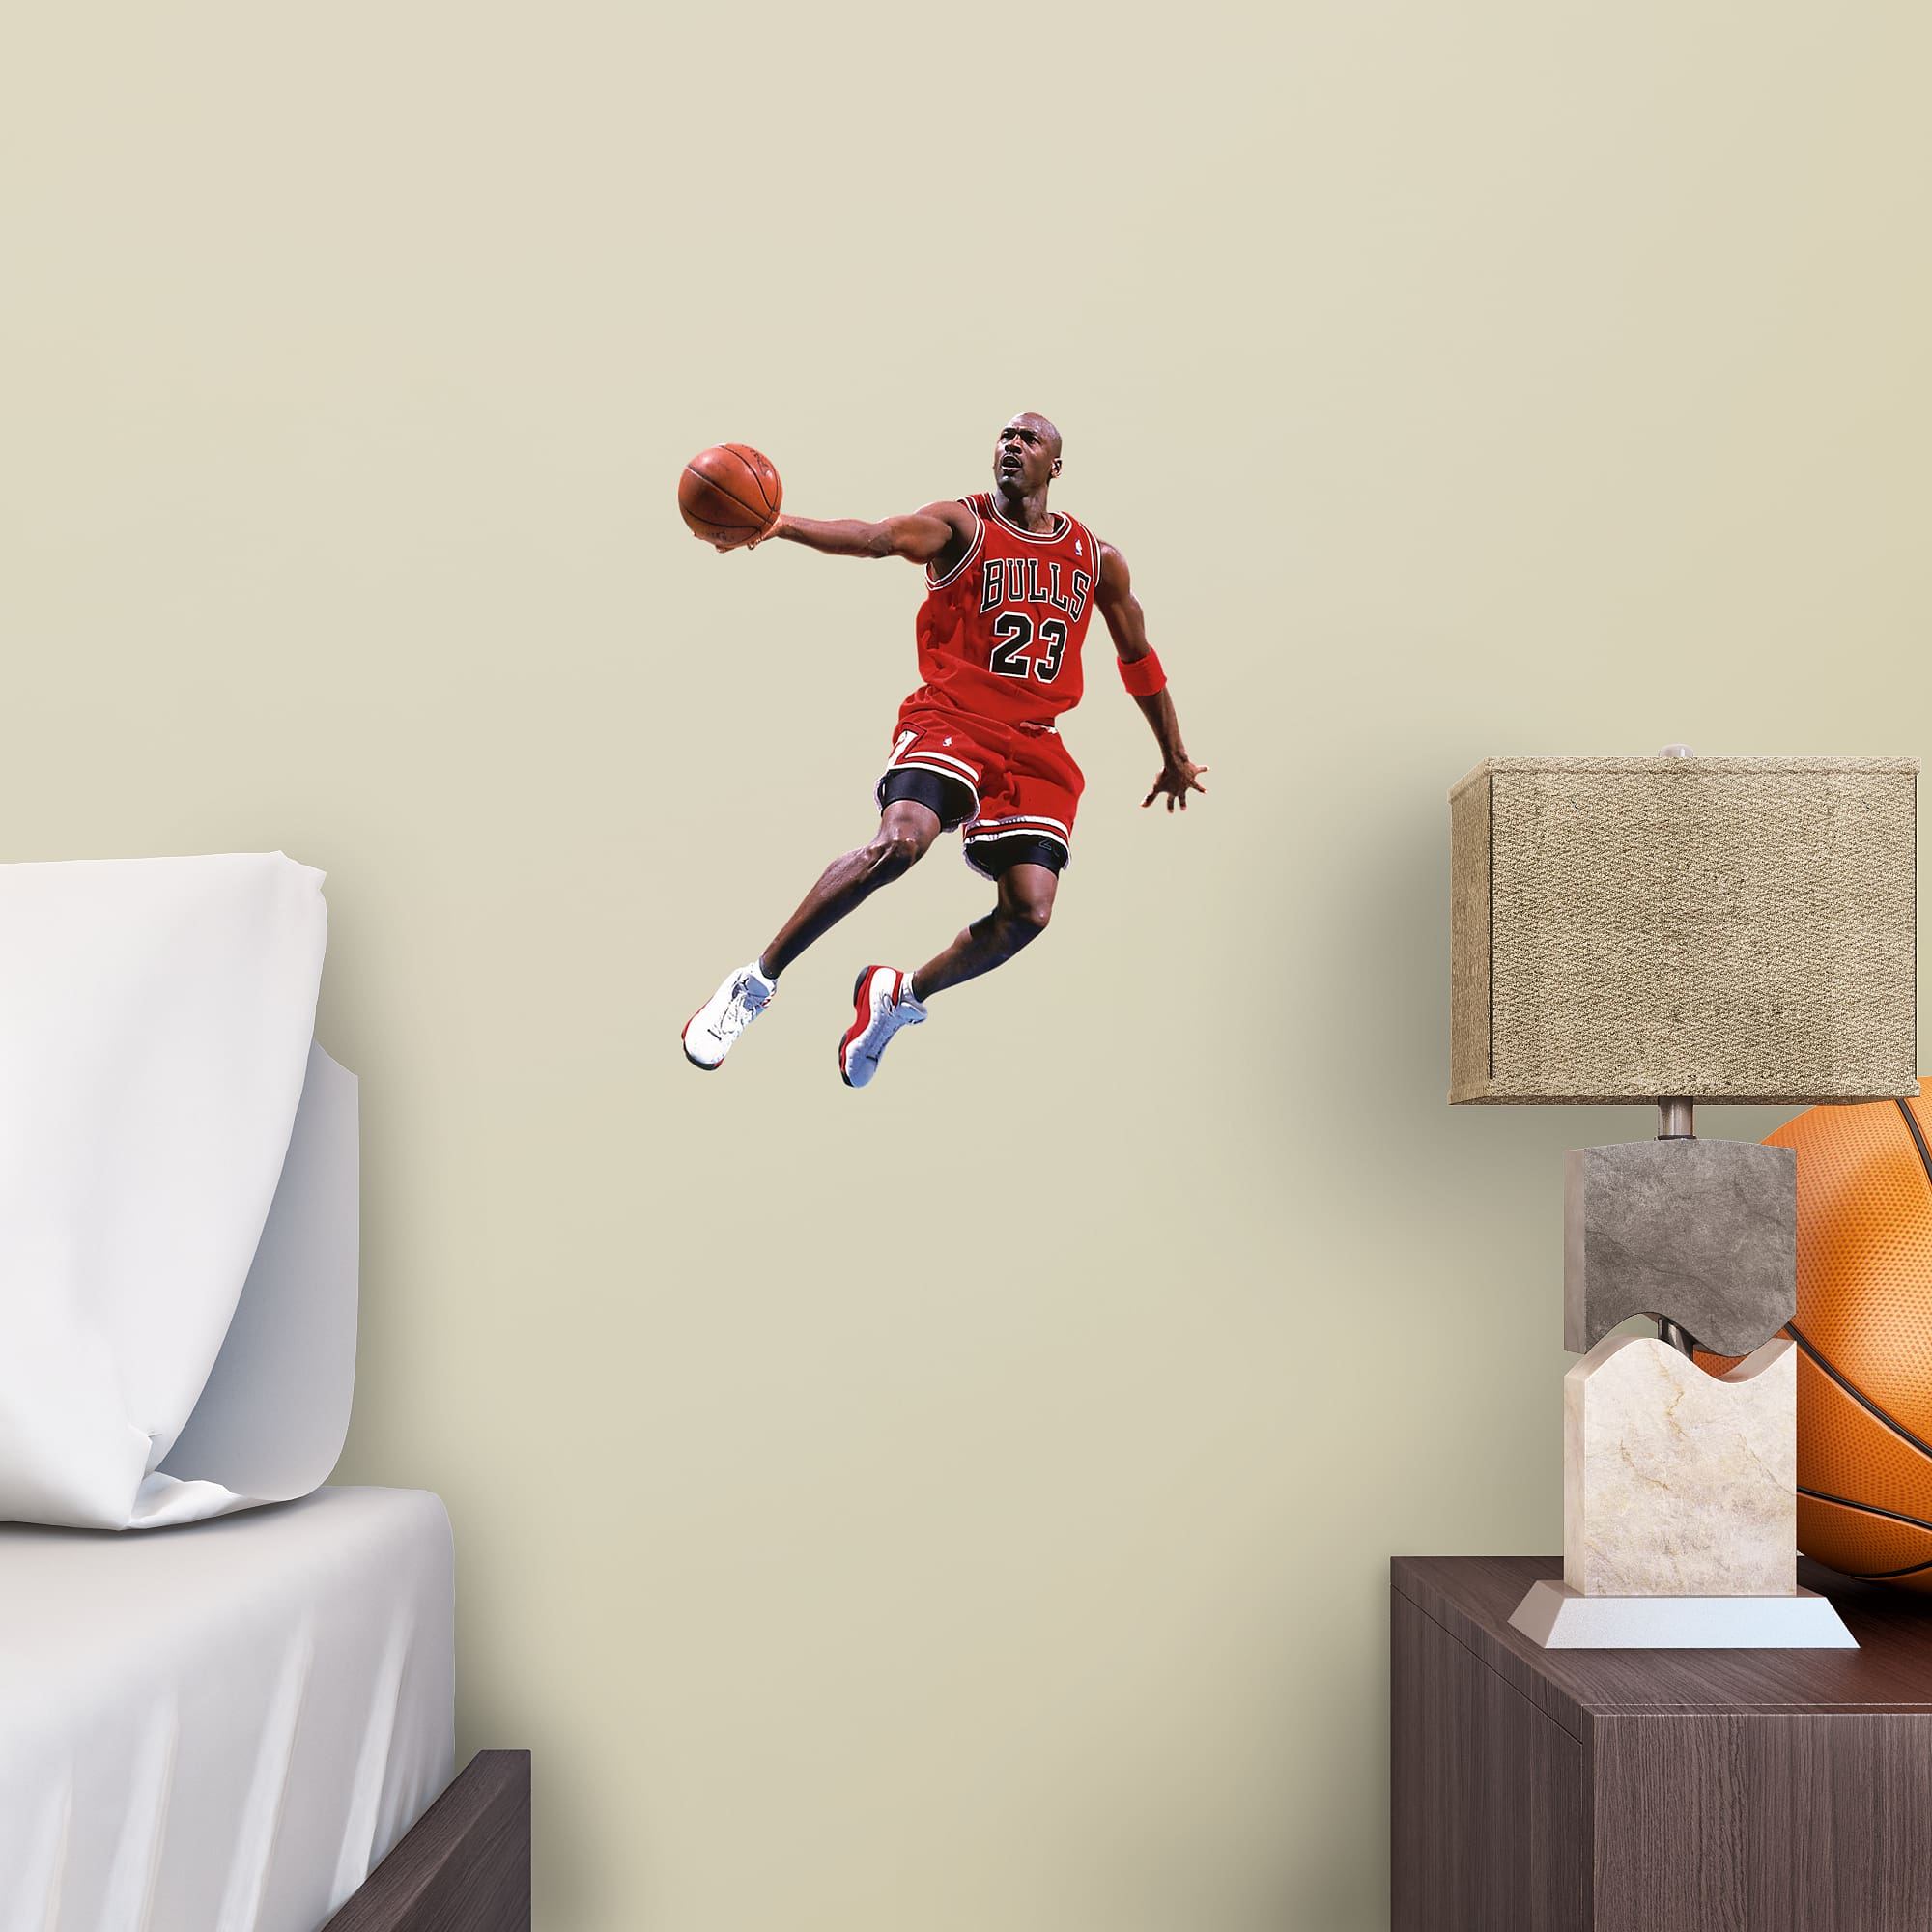 Michael Jordan for Chicago Bulls - Officially Licensed NBA Removable Wall Decal 12.0"W x 15.0"H by Fathead | Vinyl